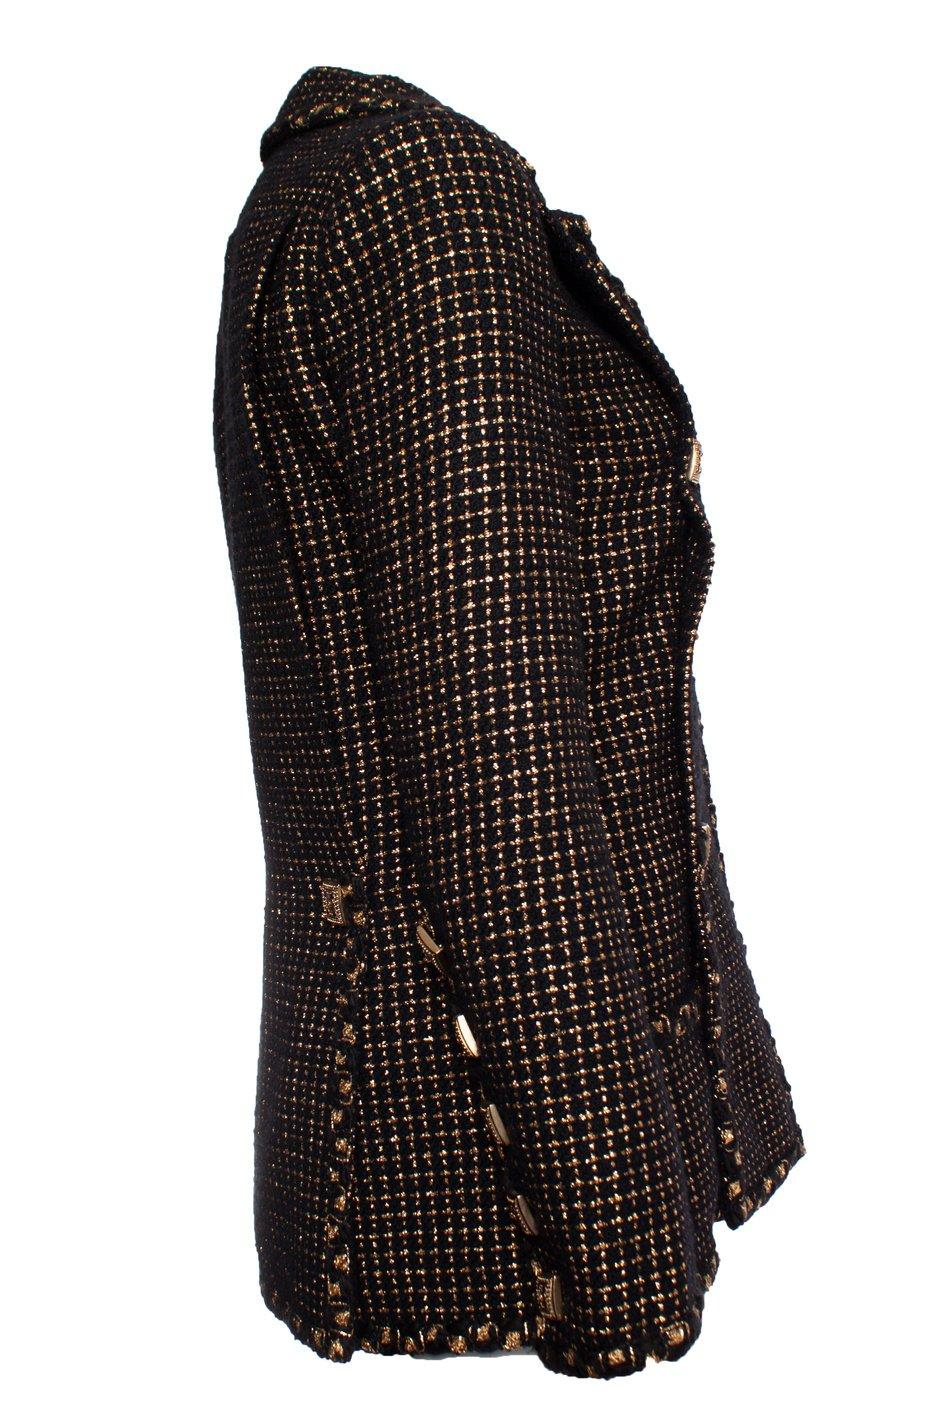 Chanel New Icon Paris / Byzance Black Tweed Jacket For Sale 7